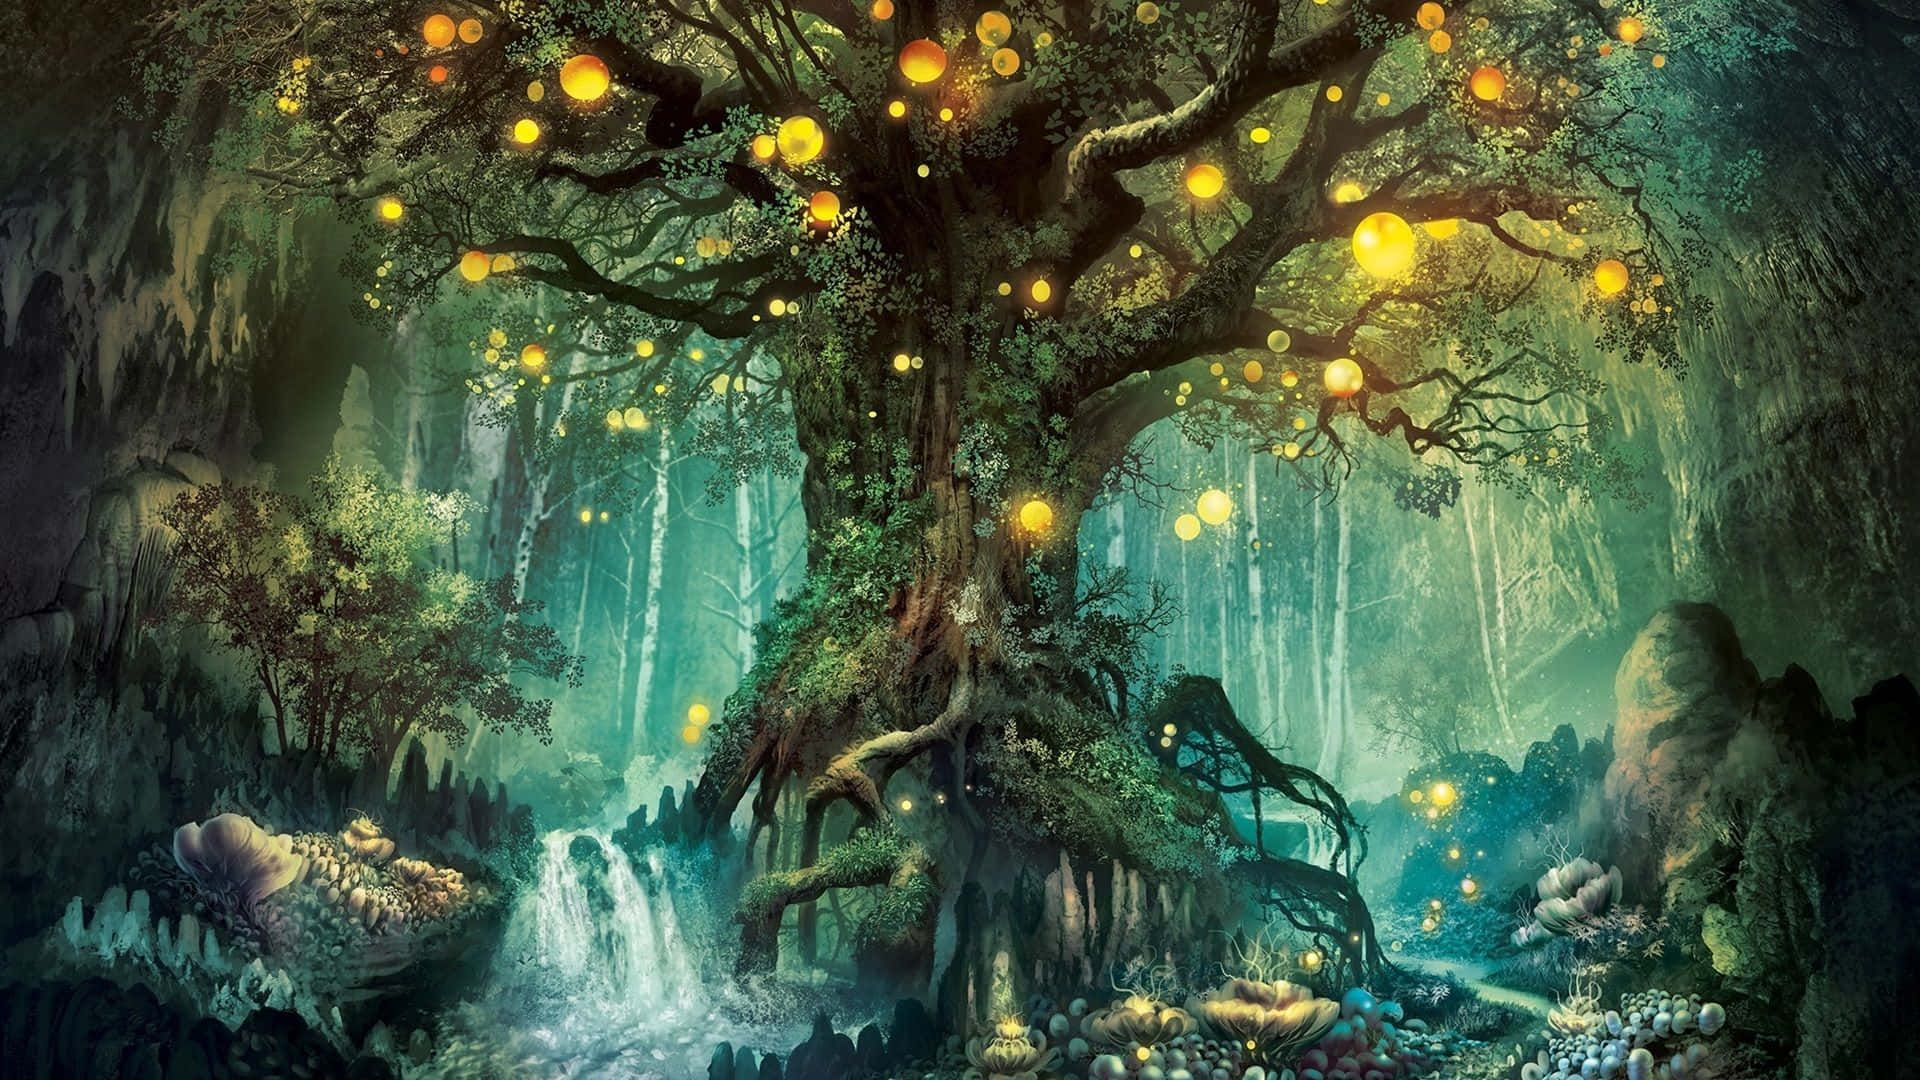 Explore the Magical Forest